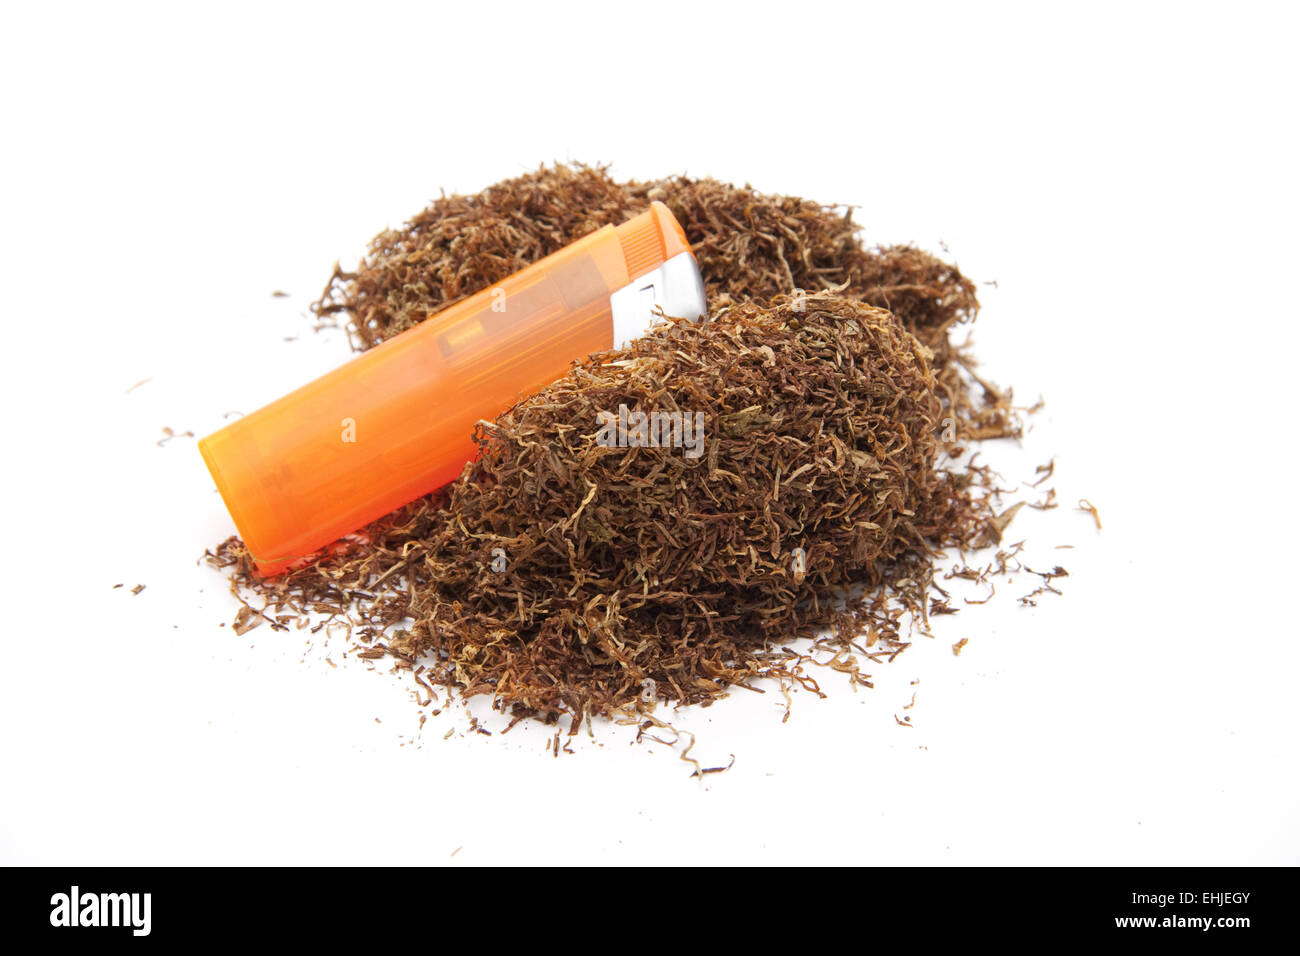 Darning tobacco and lighter Stock Photo